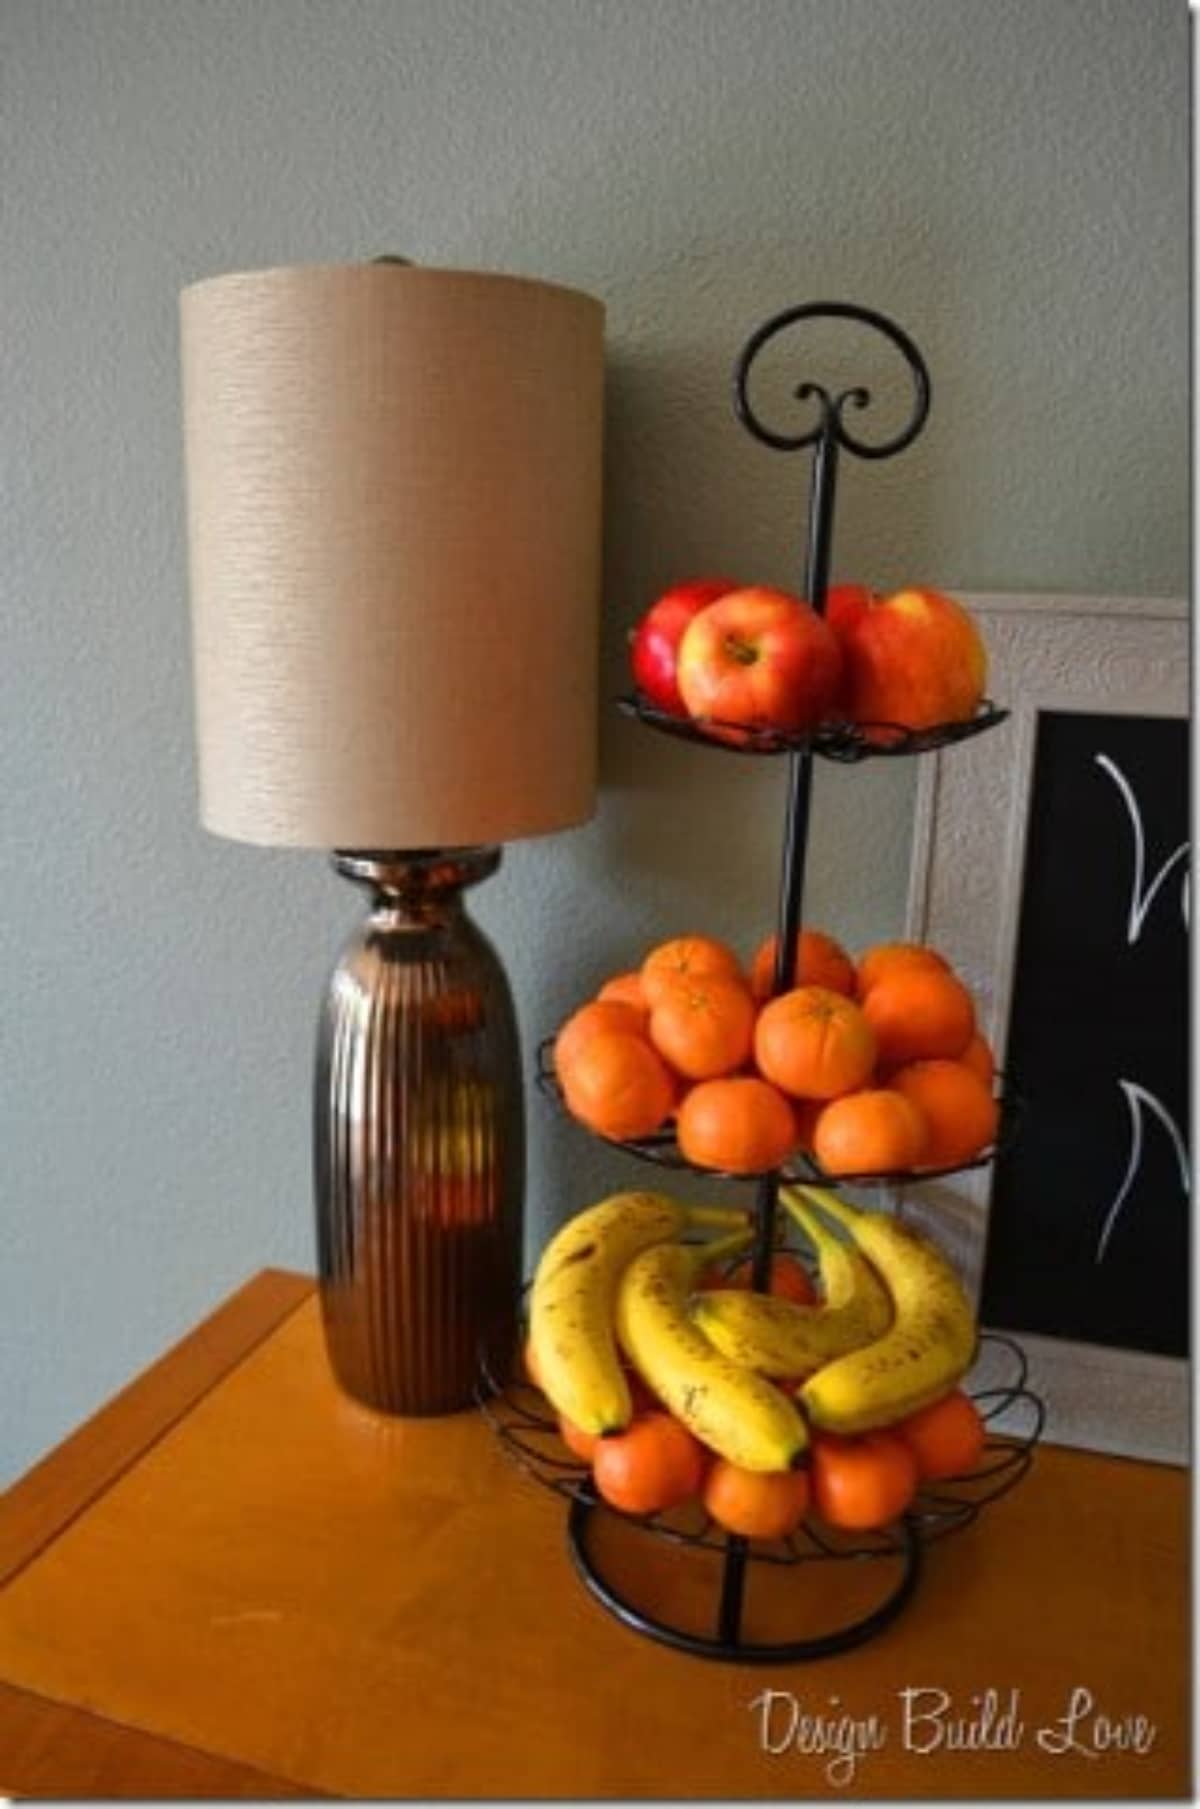 DIY Organize Fruit with a Plant Stand